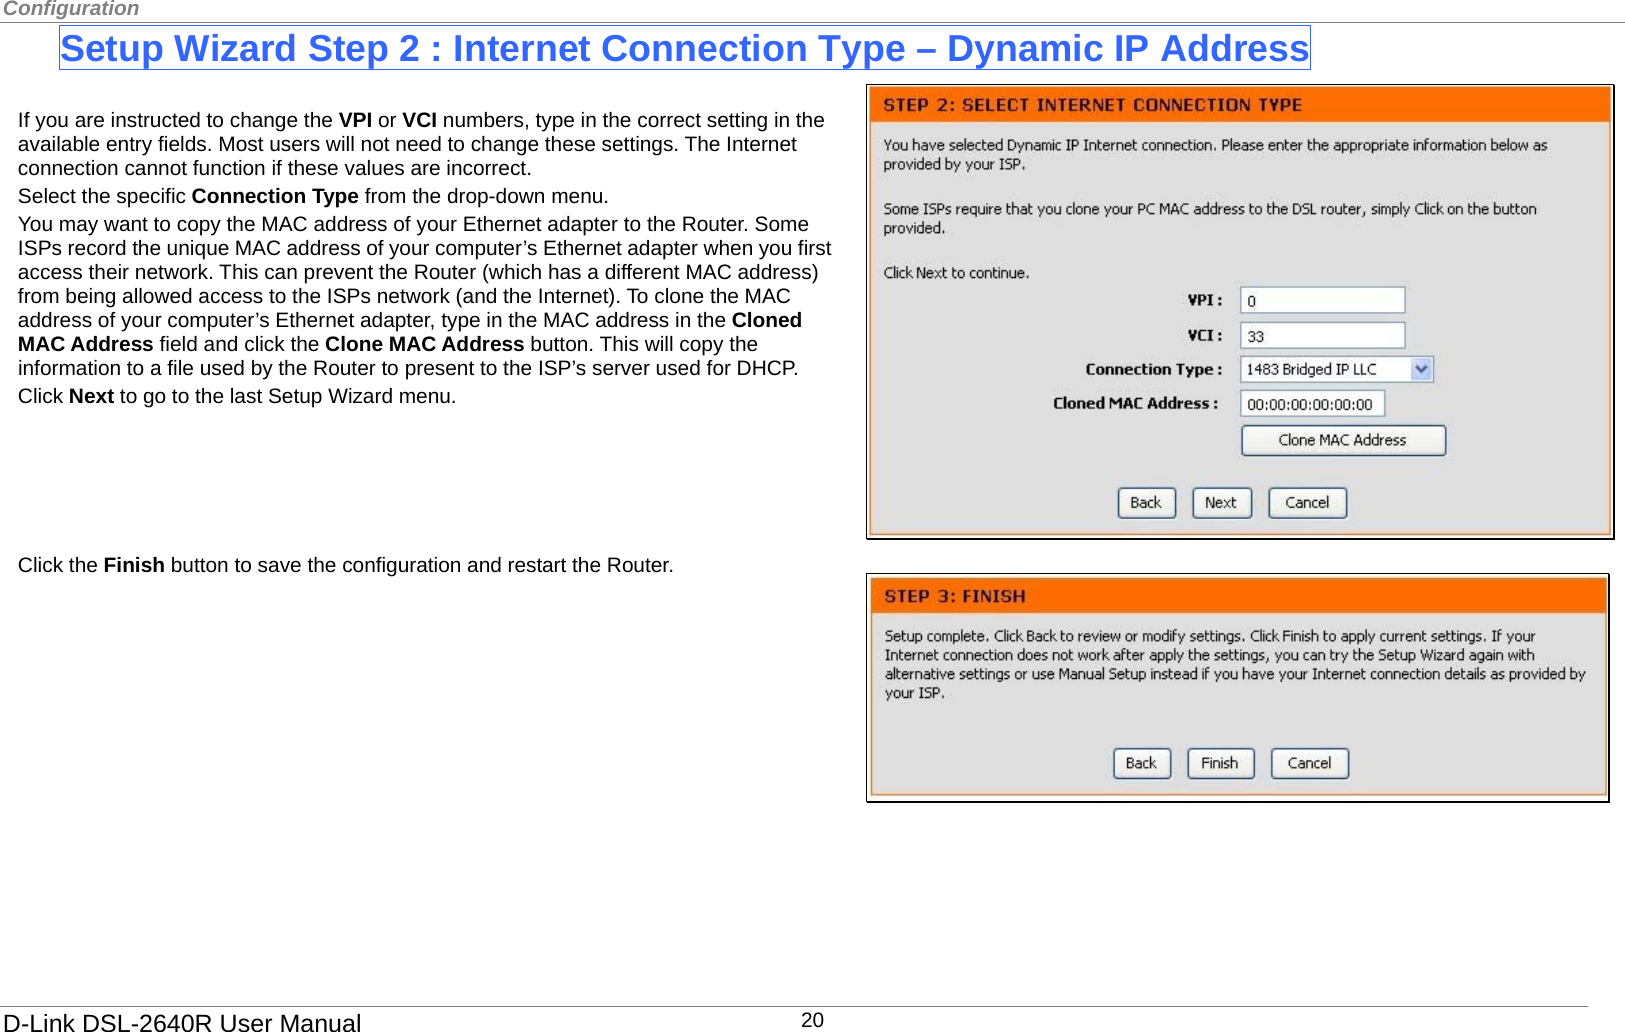 Configuration  Setup Wizard Step 2 : Internet Connection Type – Dynamic IP Address  If you are instructed to change the VPI or VCI numbers, type in the correct setting in the available entry fields. Most users will not need to change these settings. The Internet connection cannot function if these values are incorrect. Select the specific Connection Type from the drop-down menu.   You may want to copy the MAC address of your Ethernet adapter to the Router. Some ISPs record the unique MAC address of your computer’s Ethernet adapter when you first access their network. This can prevent the Router (which has a different MAC address) from being allowed access to the ISPs network (and the Internet). To clone the MAC address of your computer’s Ethernet adapter, type in the MAC address in the Cloned MAC Address field and click the Clone MAC Address button. This will copy the information to a file used by the Router to present to the ISP’s server used for DHCP. Click Next to go to the last Setup Wizard menu.      Click the Finish button to save the configuration and restart the Router.         D-Link DSL-2640R User Manual 20